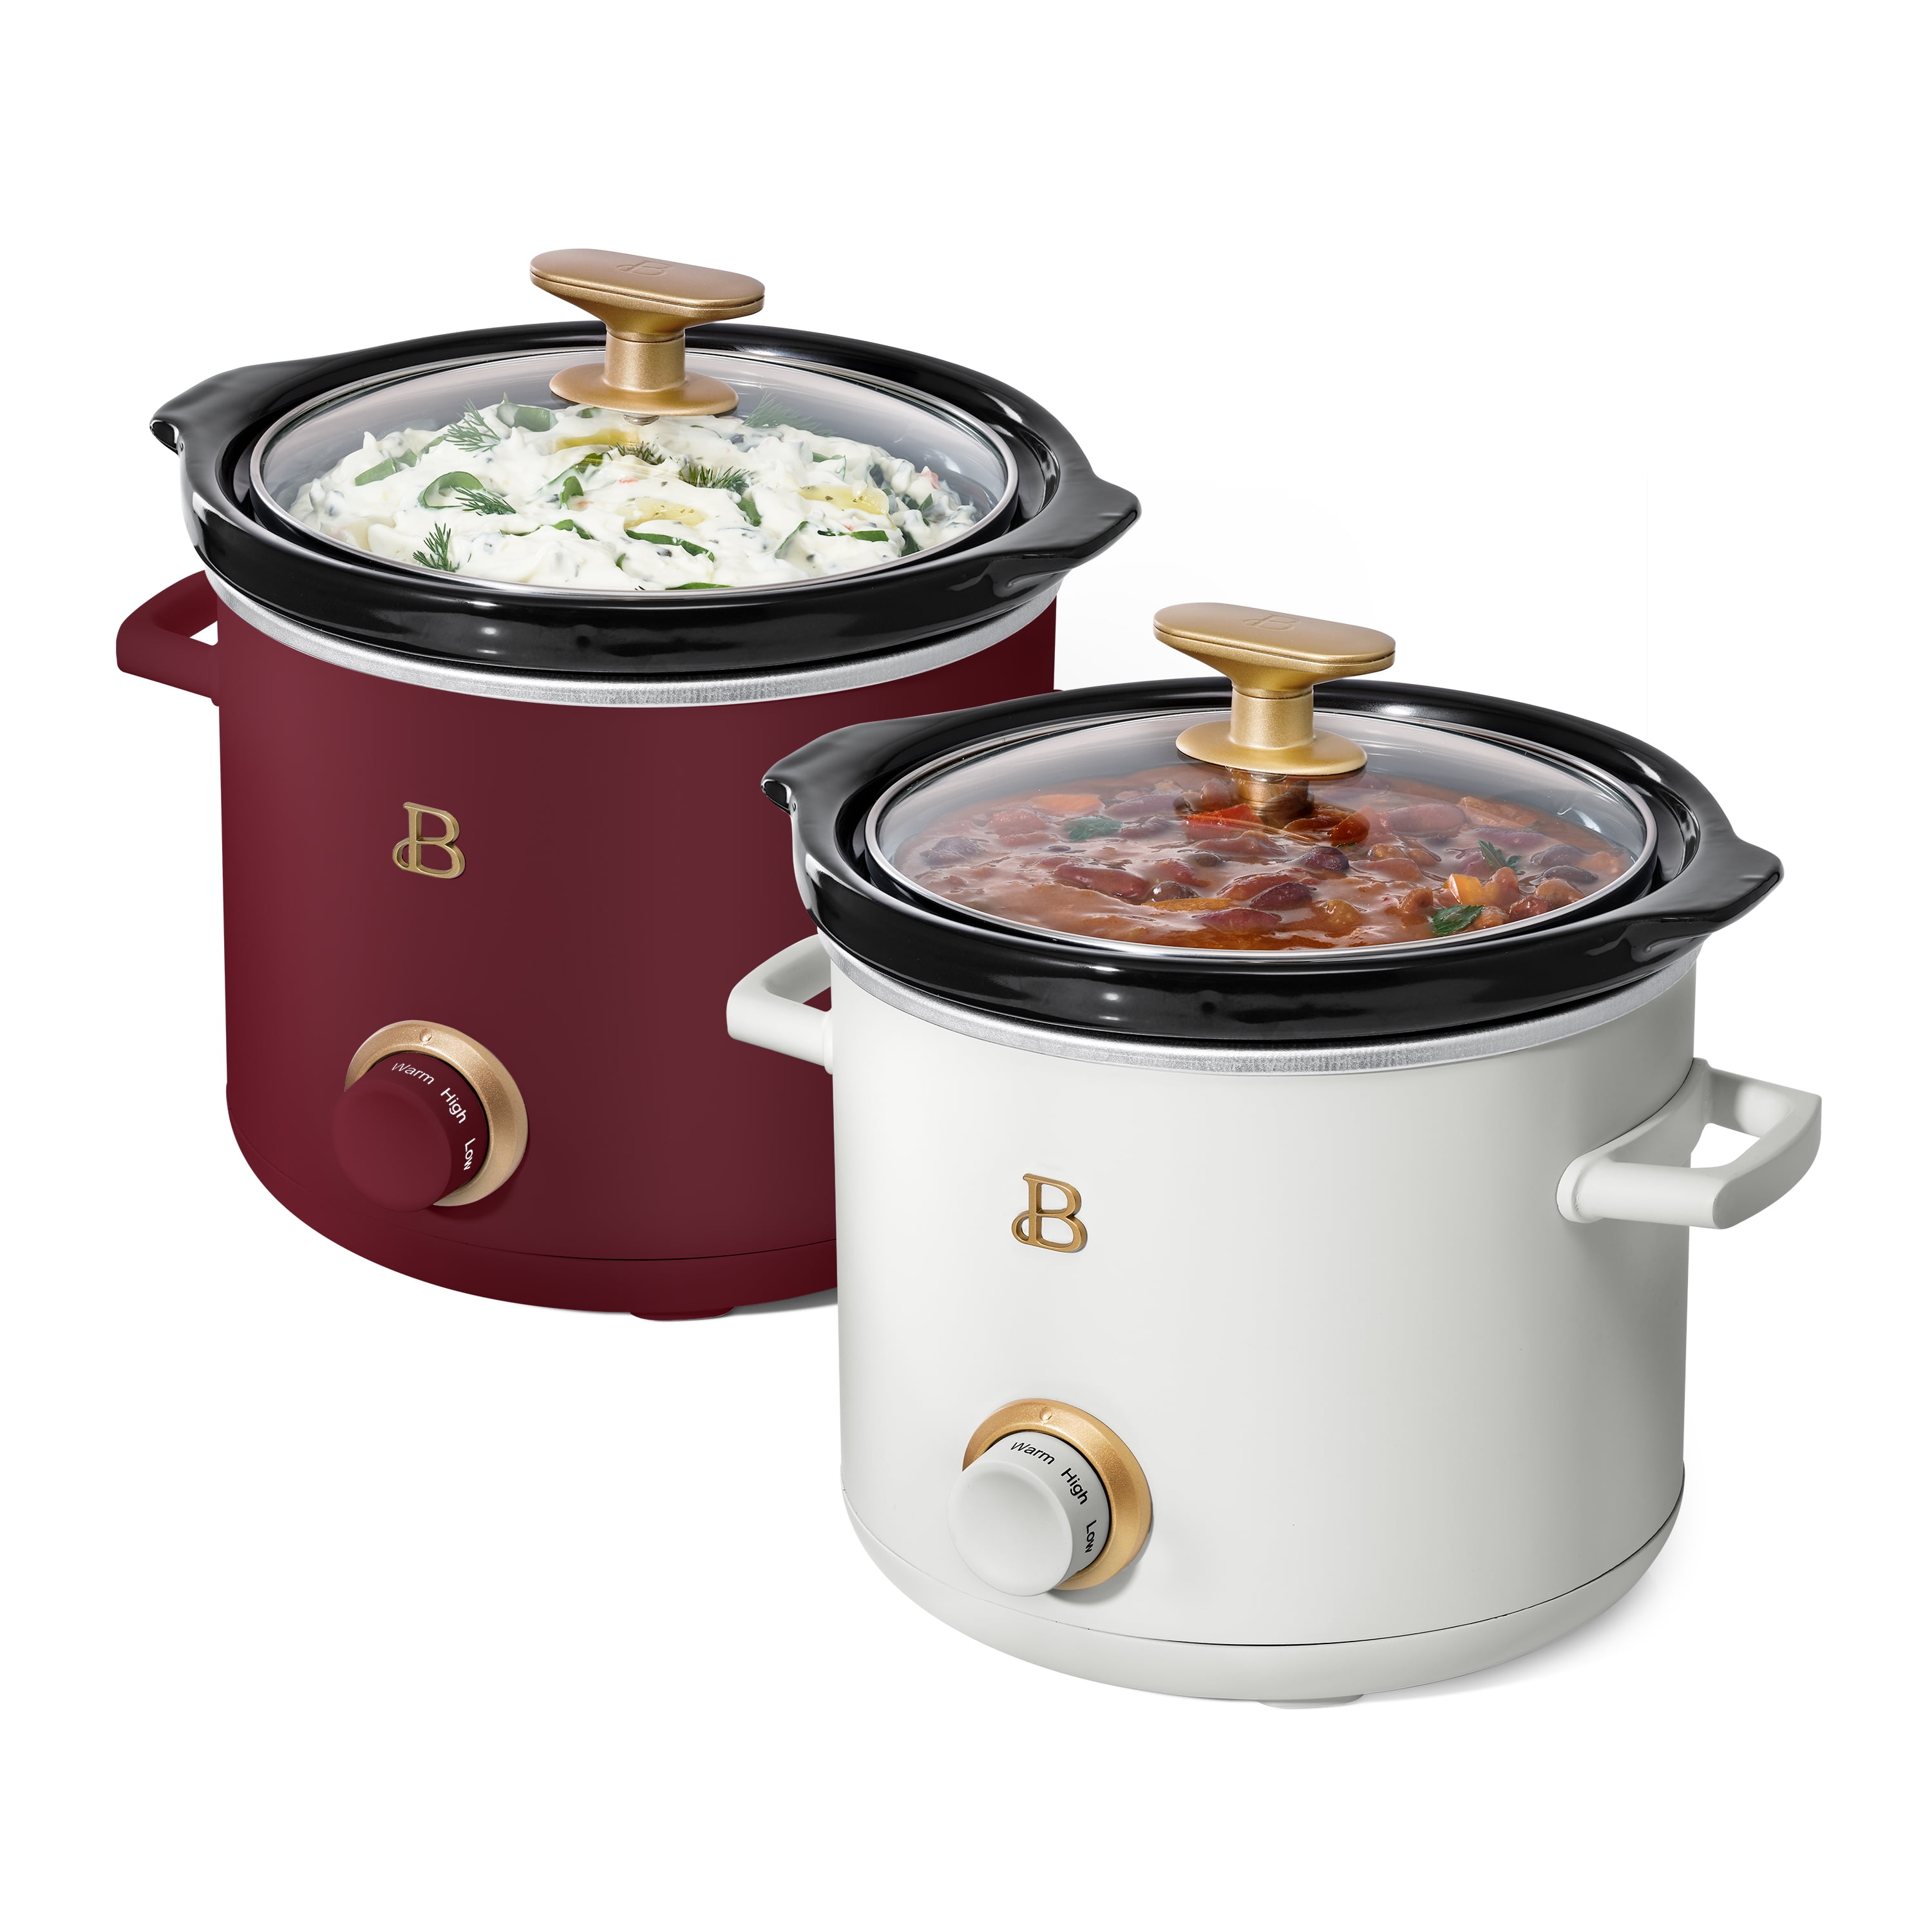 Beautiful 2 qt Slow Cooker Set, 2-Pack, White Icing and Merlot by Drew Barrymore, 19340, 1000 W